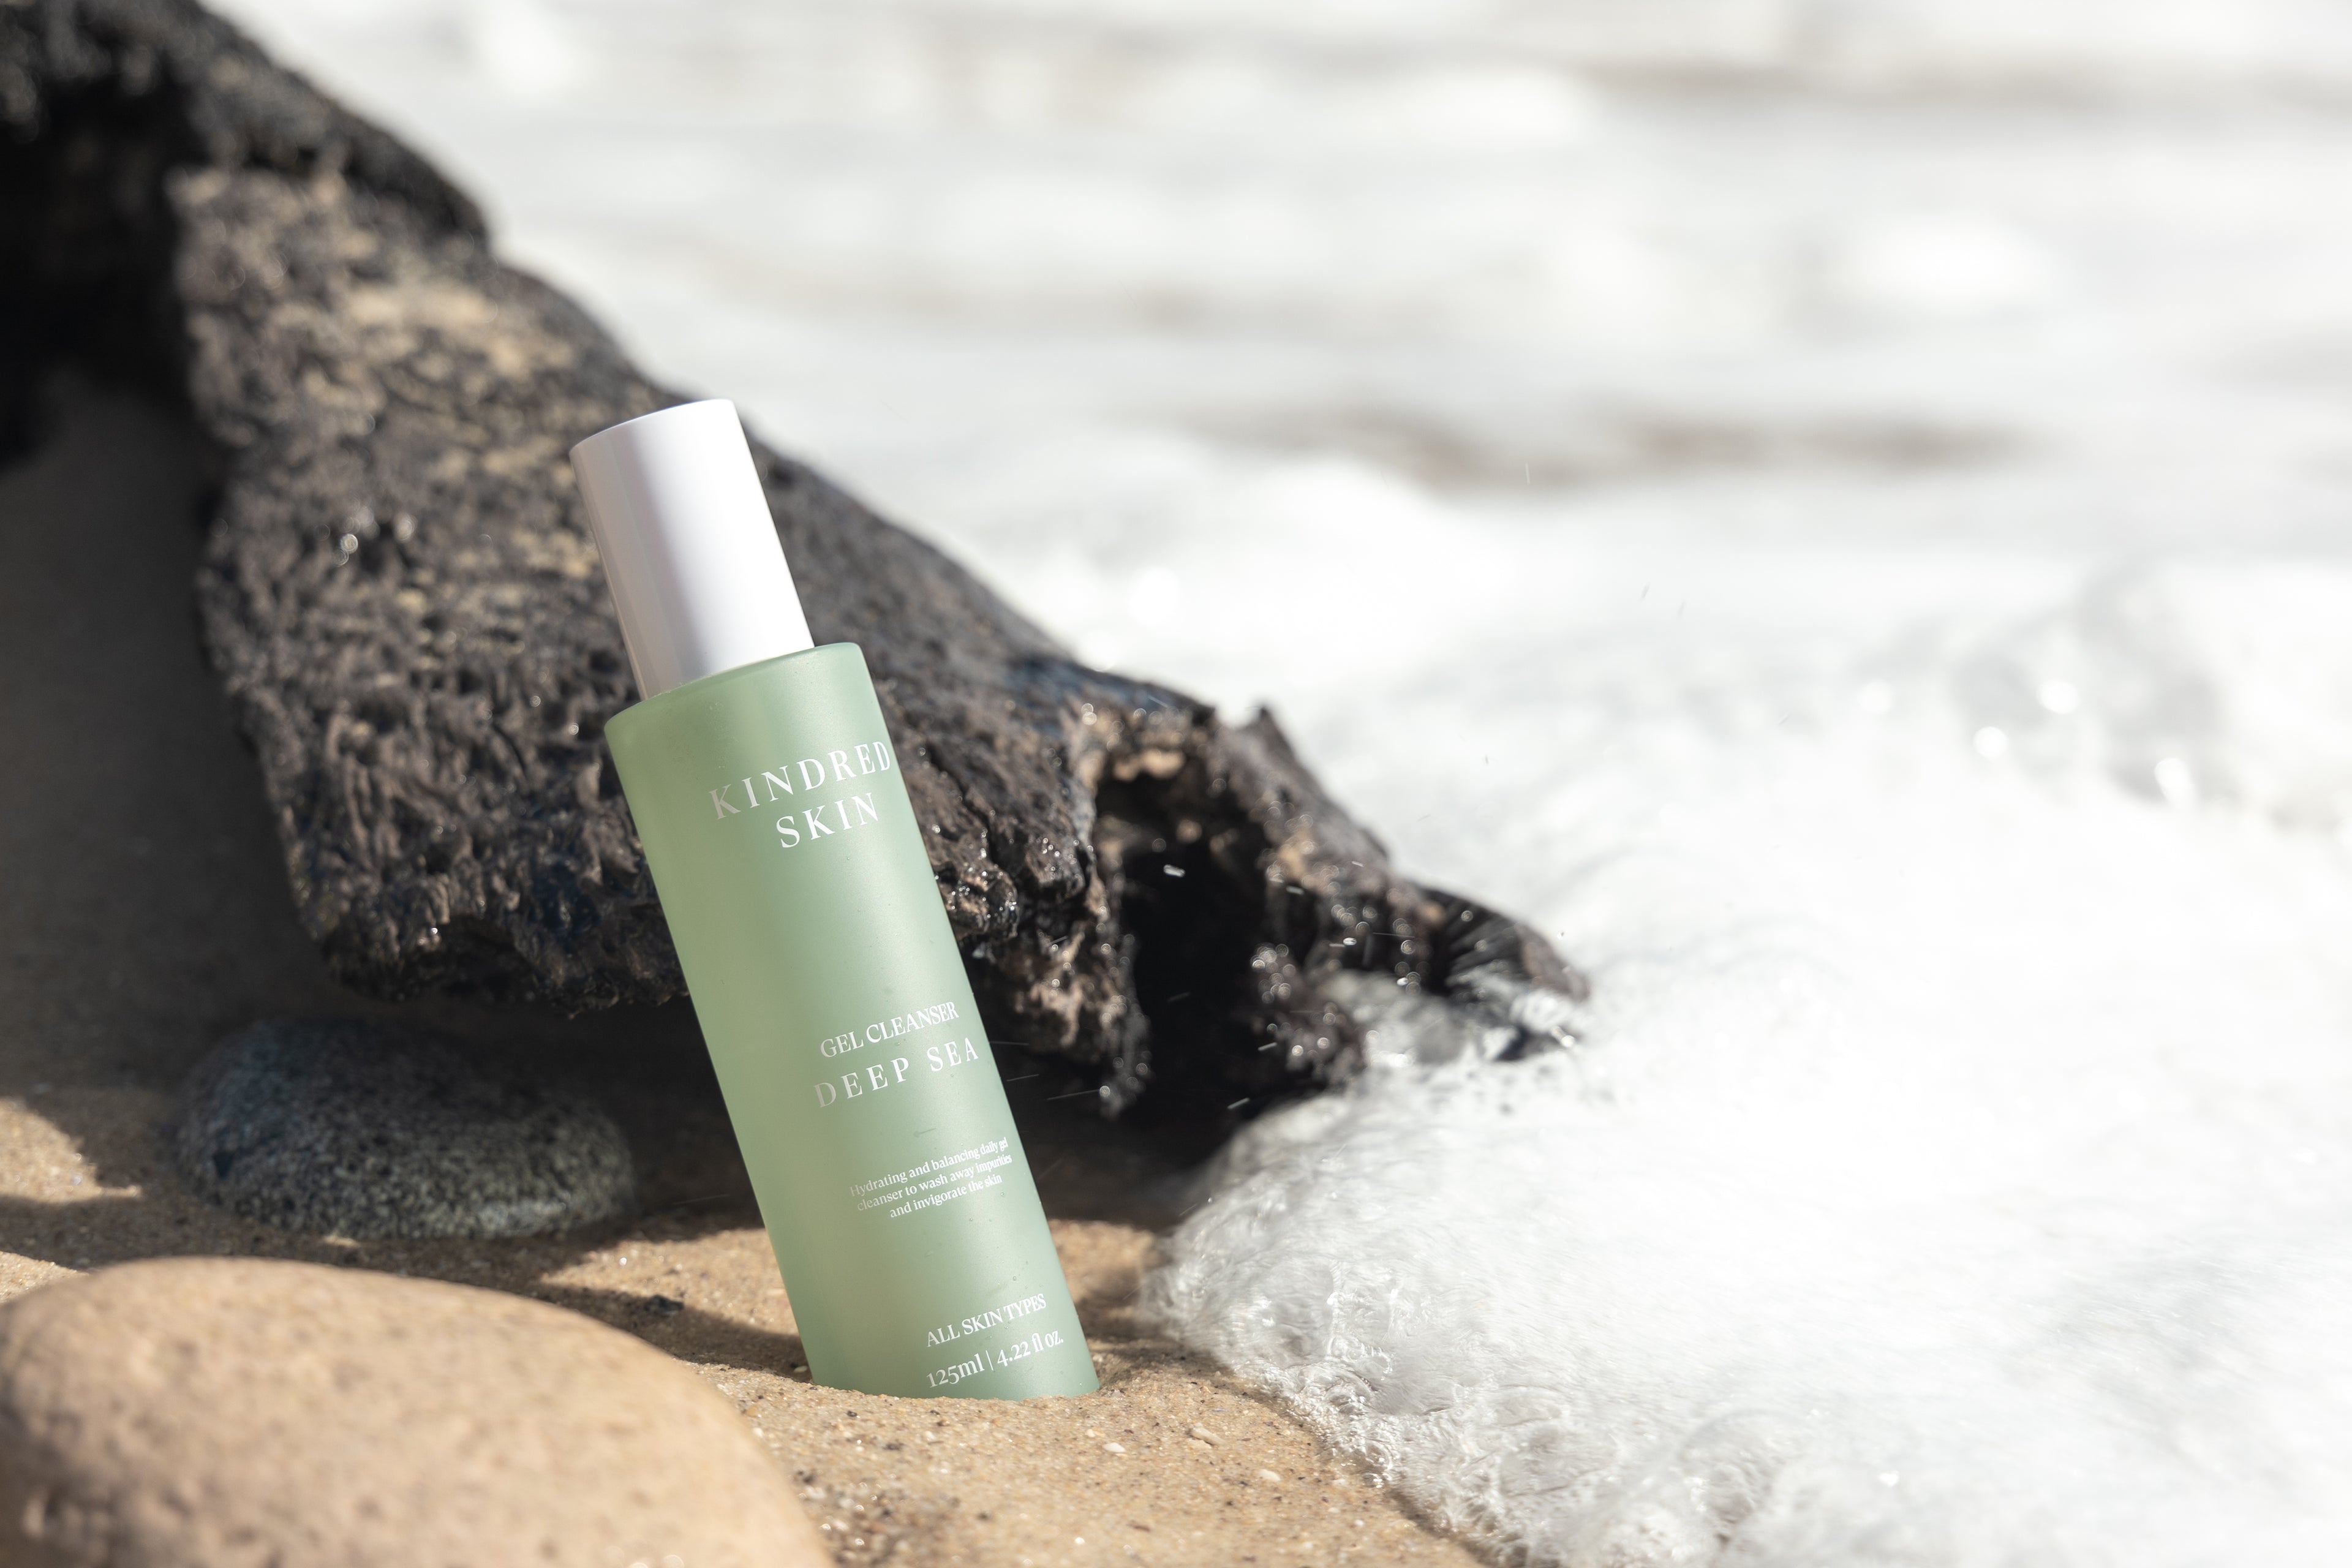 gel cleanser at the ocean in the water at the beach in the sand with a wave coming up to it become a stockist for an australian skincare brand Kindred Skin to ease confusion around skin-care, by getting the basics right through skin hygiene innovations. So that women of any skin type, can feel fresh and motivated to reach their full potential - every single day. with gel cleanser, face towels and headband products